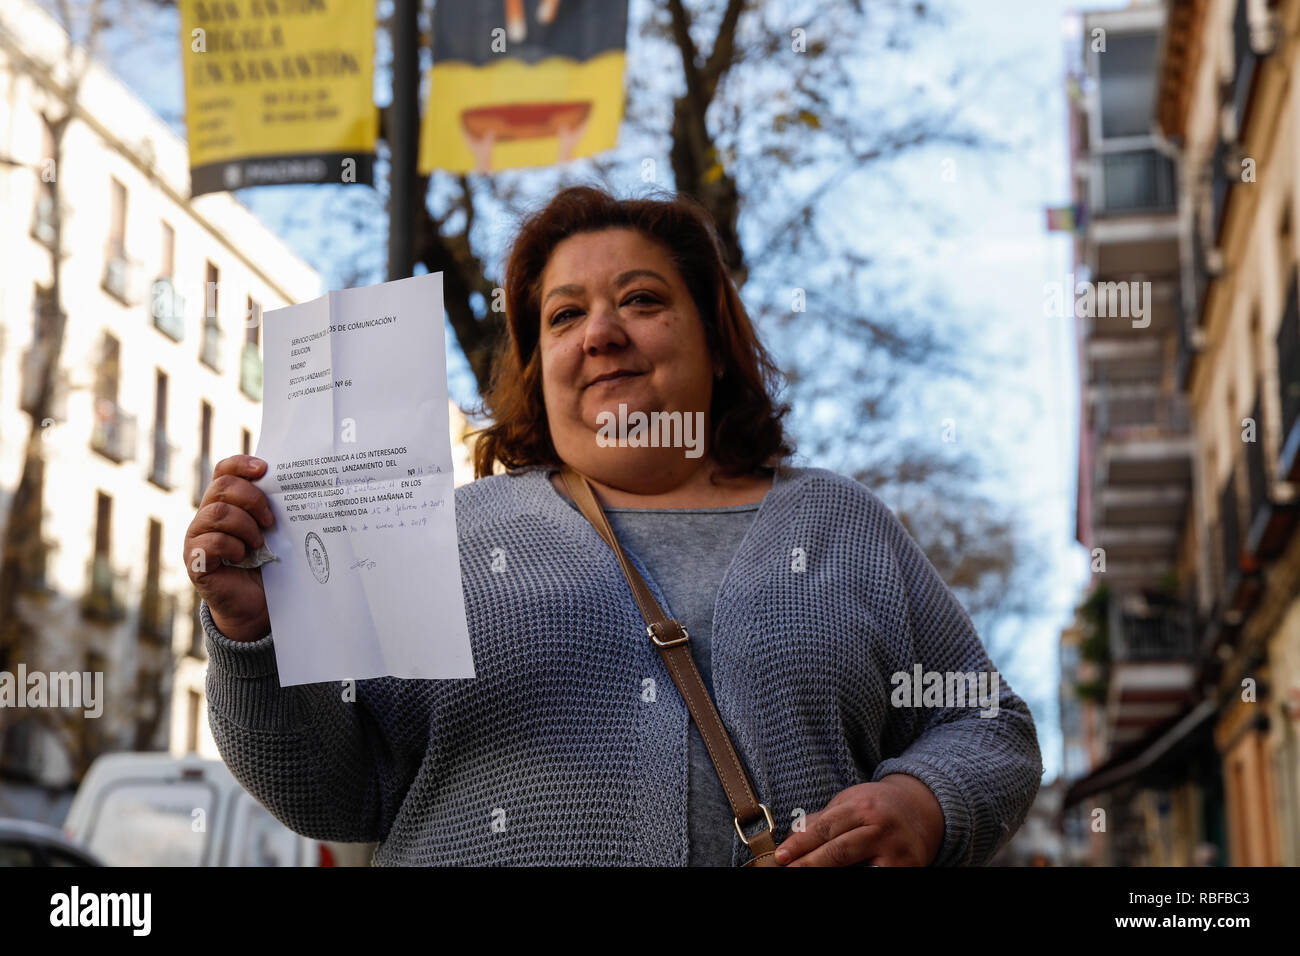 Madrid, Spain. 10th January, 2019. ROSA, with the resolution of the stoppage of the eviction of their house for a month. More than 50 activists concentrated on the door of the building of number 11 Argumosa Street have prevented without incident that the police evicted the woman and her family. It's postponed for another month on Jan 10, 2019 in Madrid, Spain Credit: Jesús Hellin/Alamy Live News Stock Photo